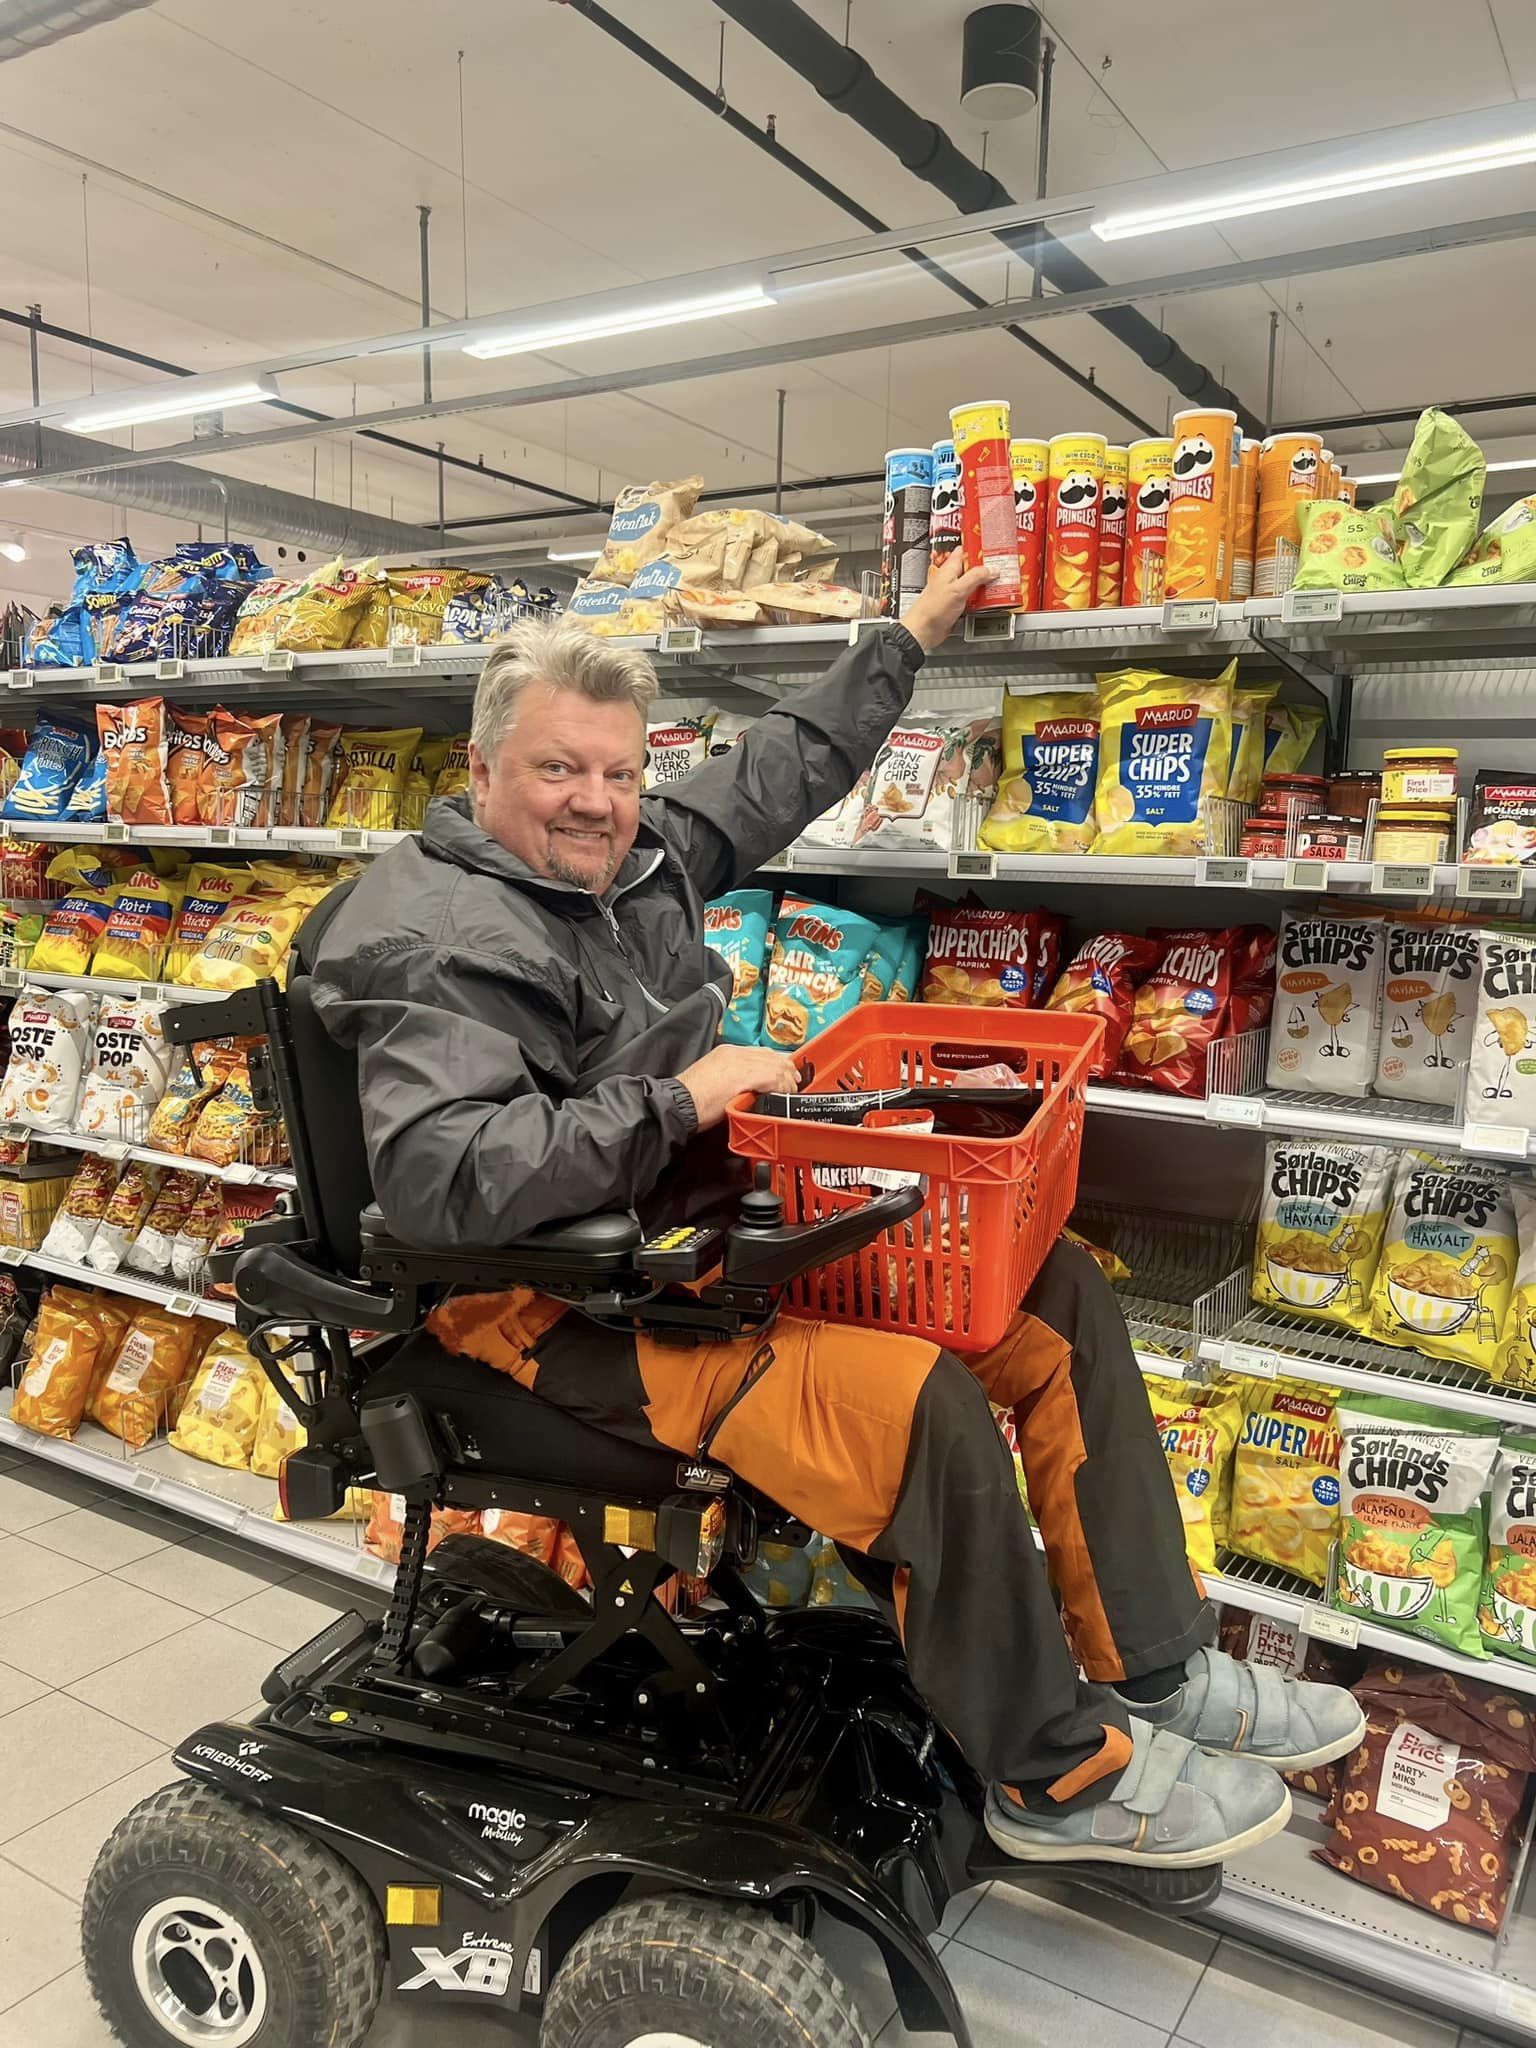 Wheelchair user in supermarket with elevated seat to reach higher shelf.